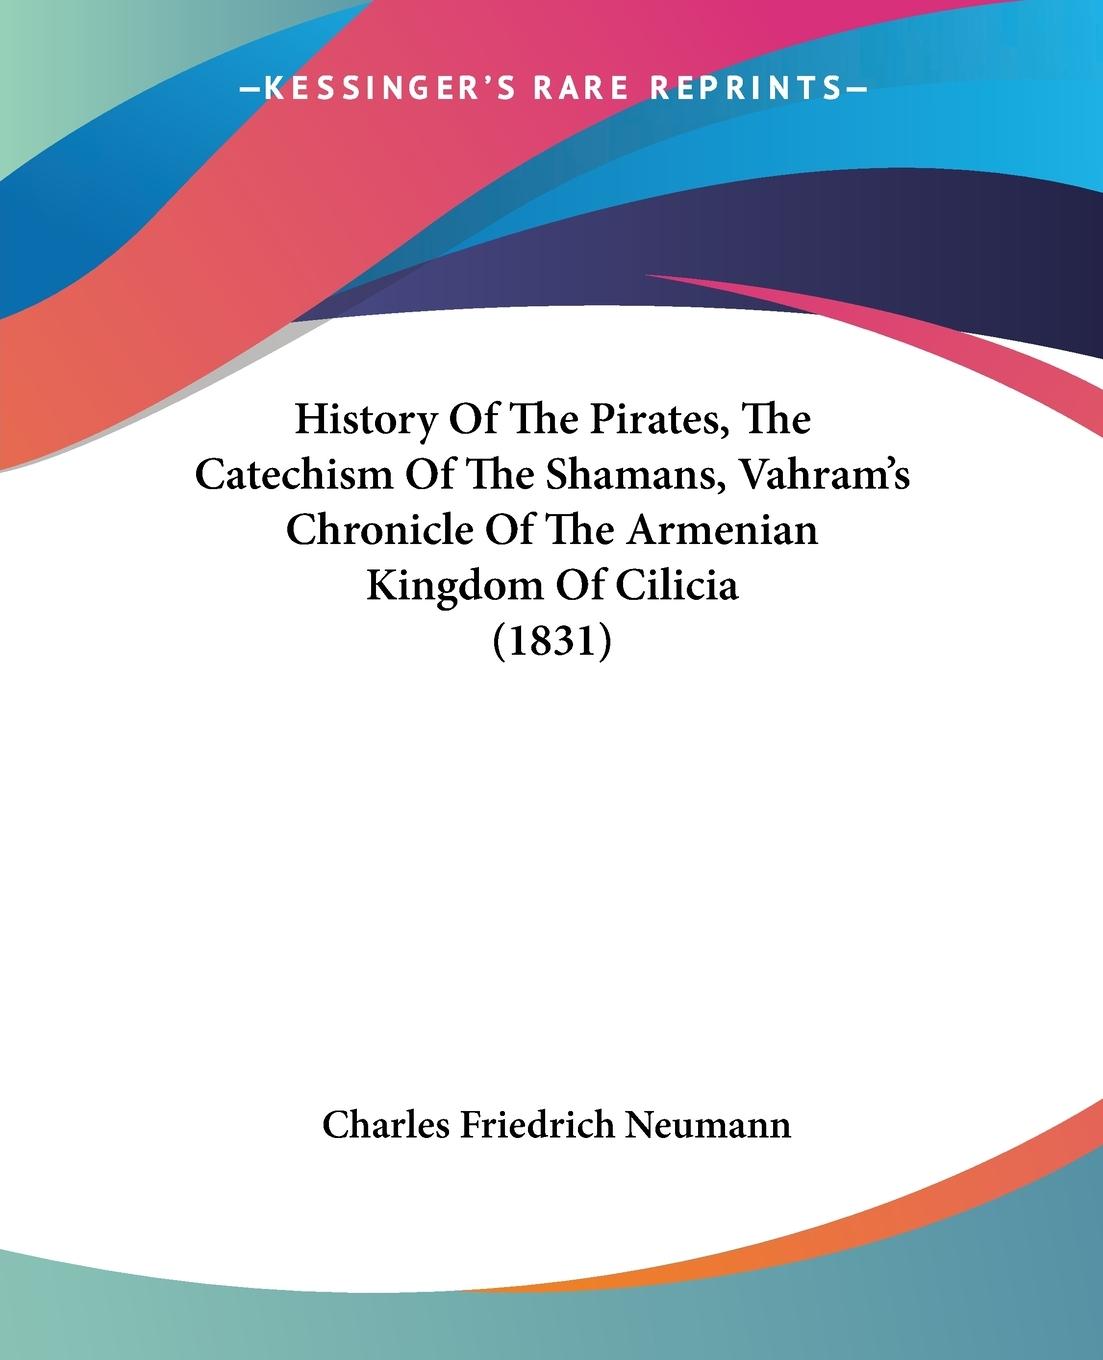 History Of The Pirates, The Catechism Of The Shamans, Vahram s Chronicle Of The Armenian Kingdom Of Cilicia (1831)